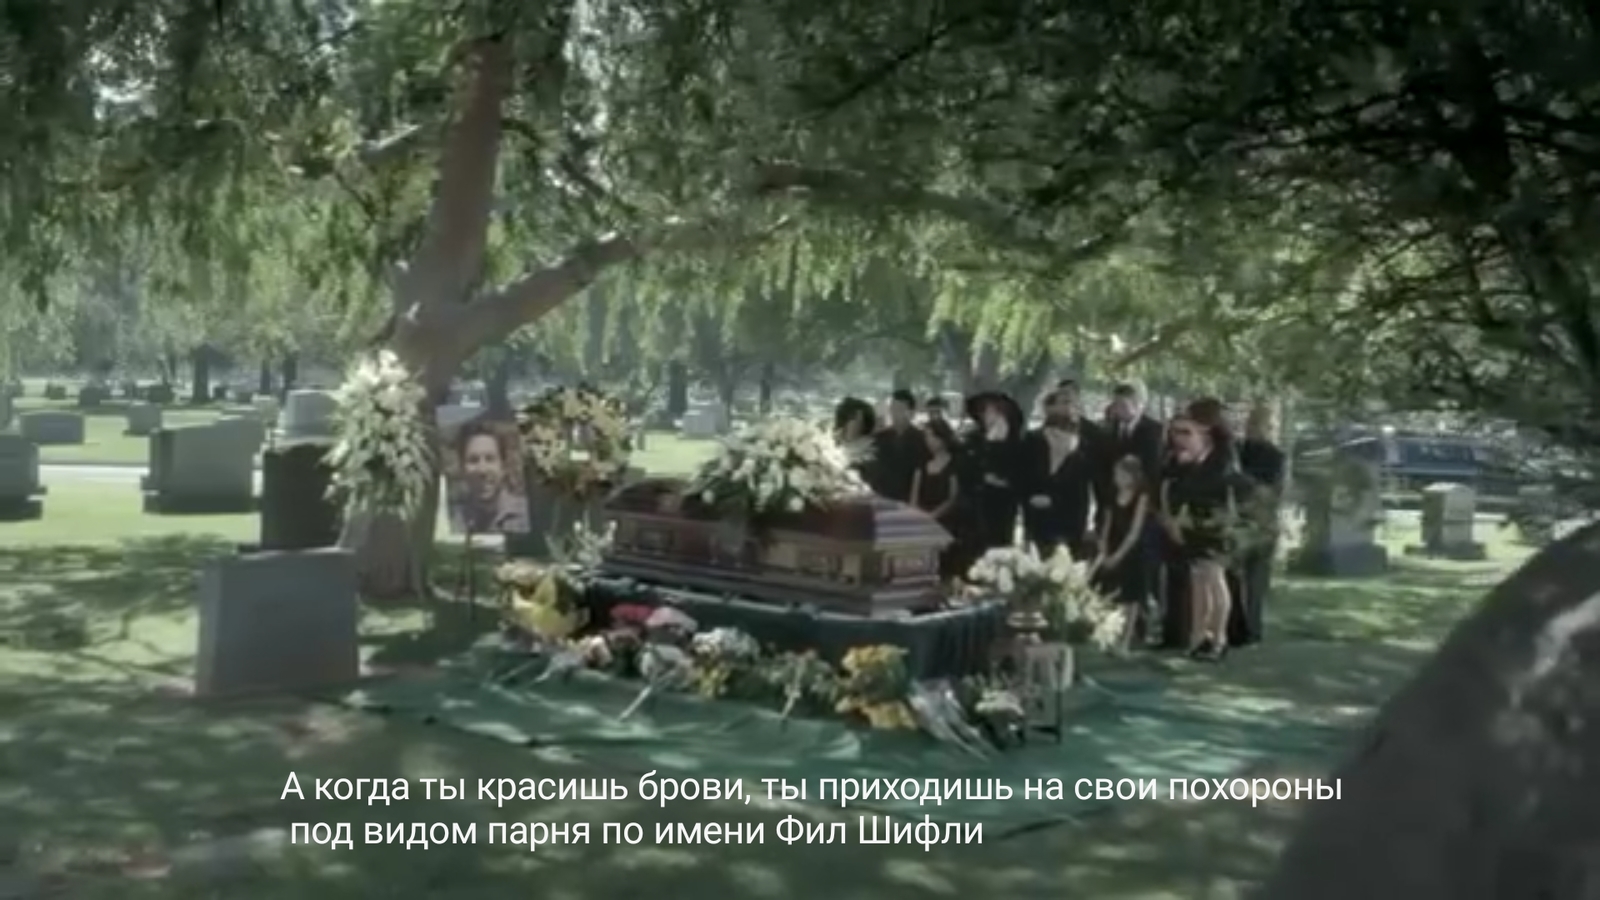 Don't show up to your funeral under the name of a guy named Phil Shifly - Advertising, Cable, Creative, Youtube, Longpost